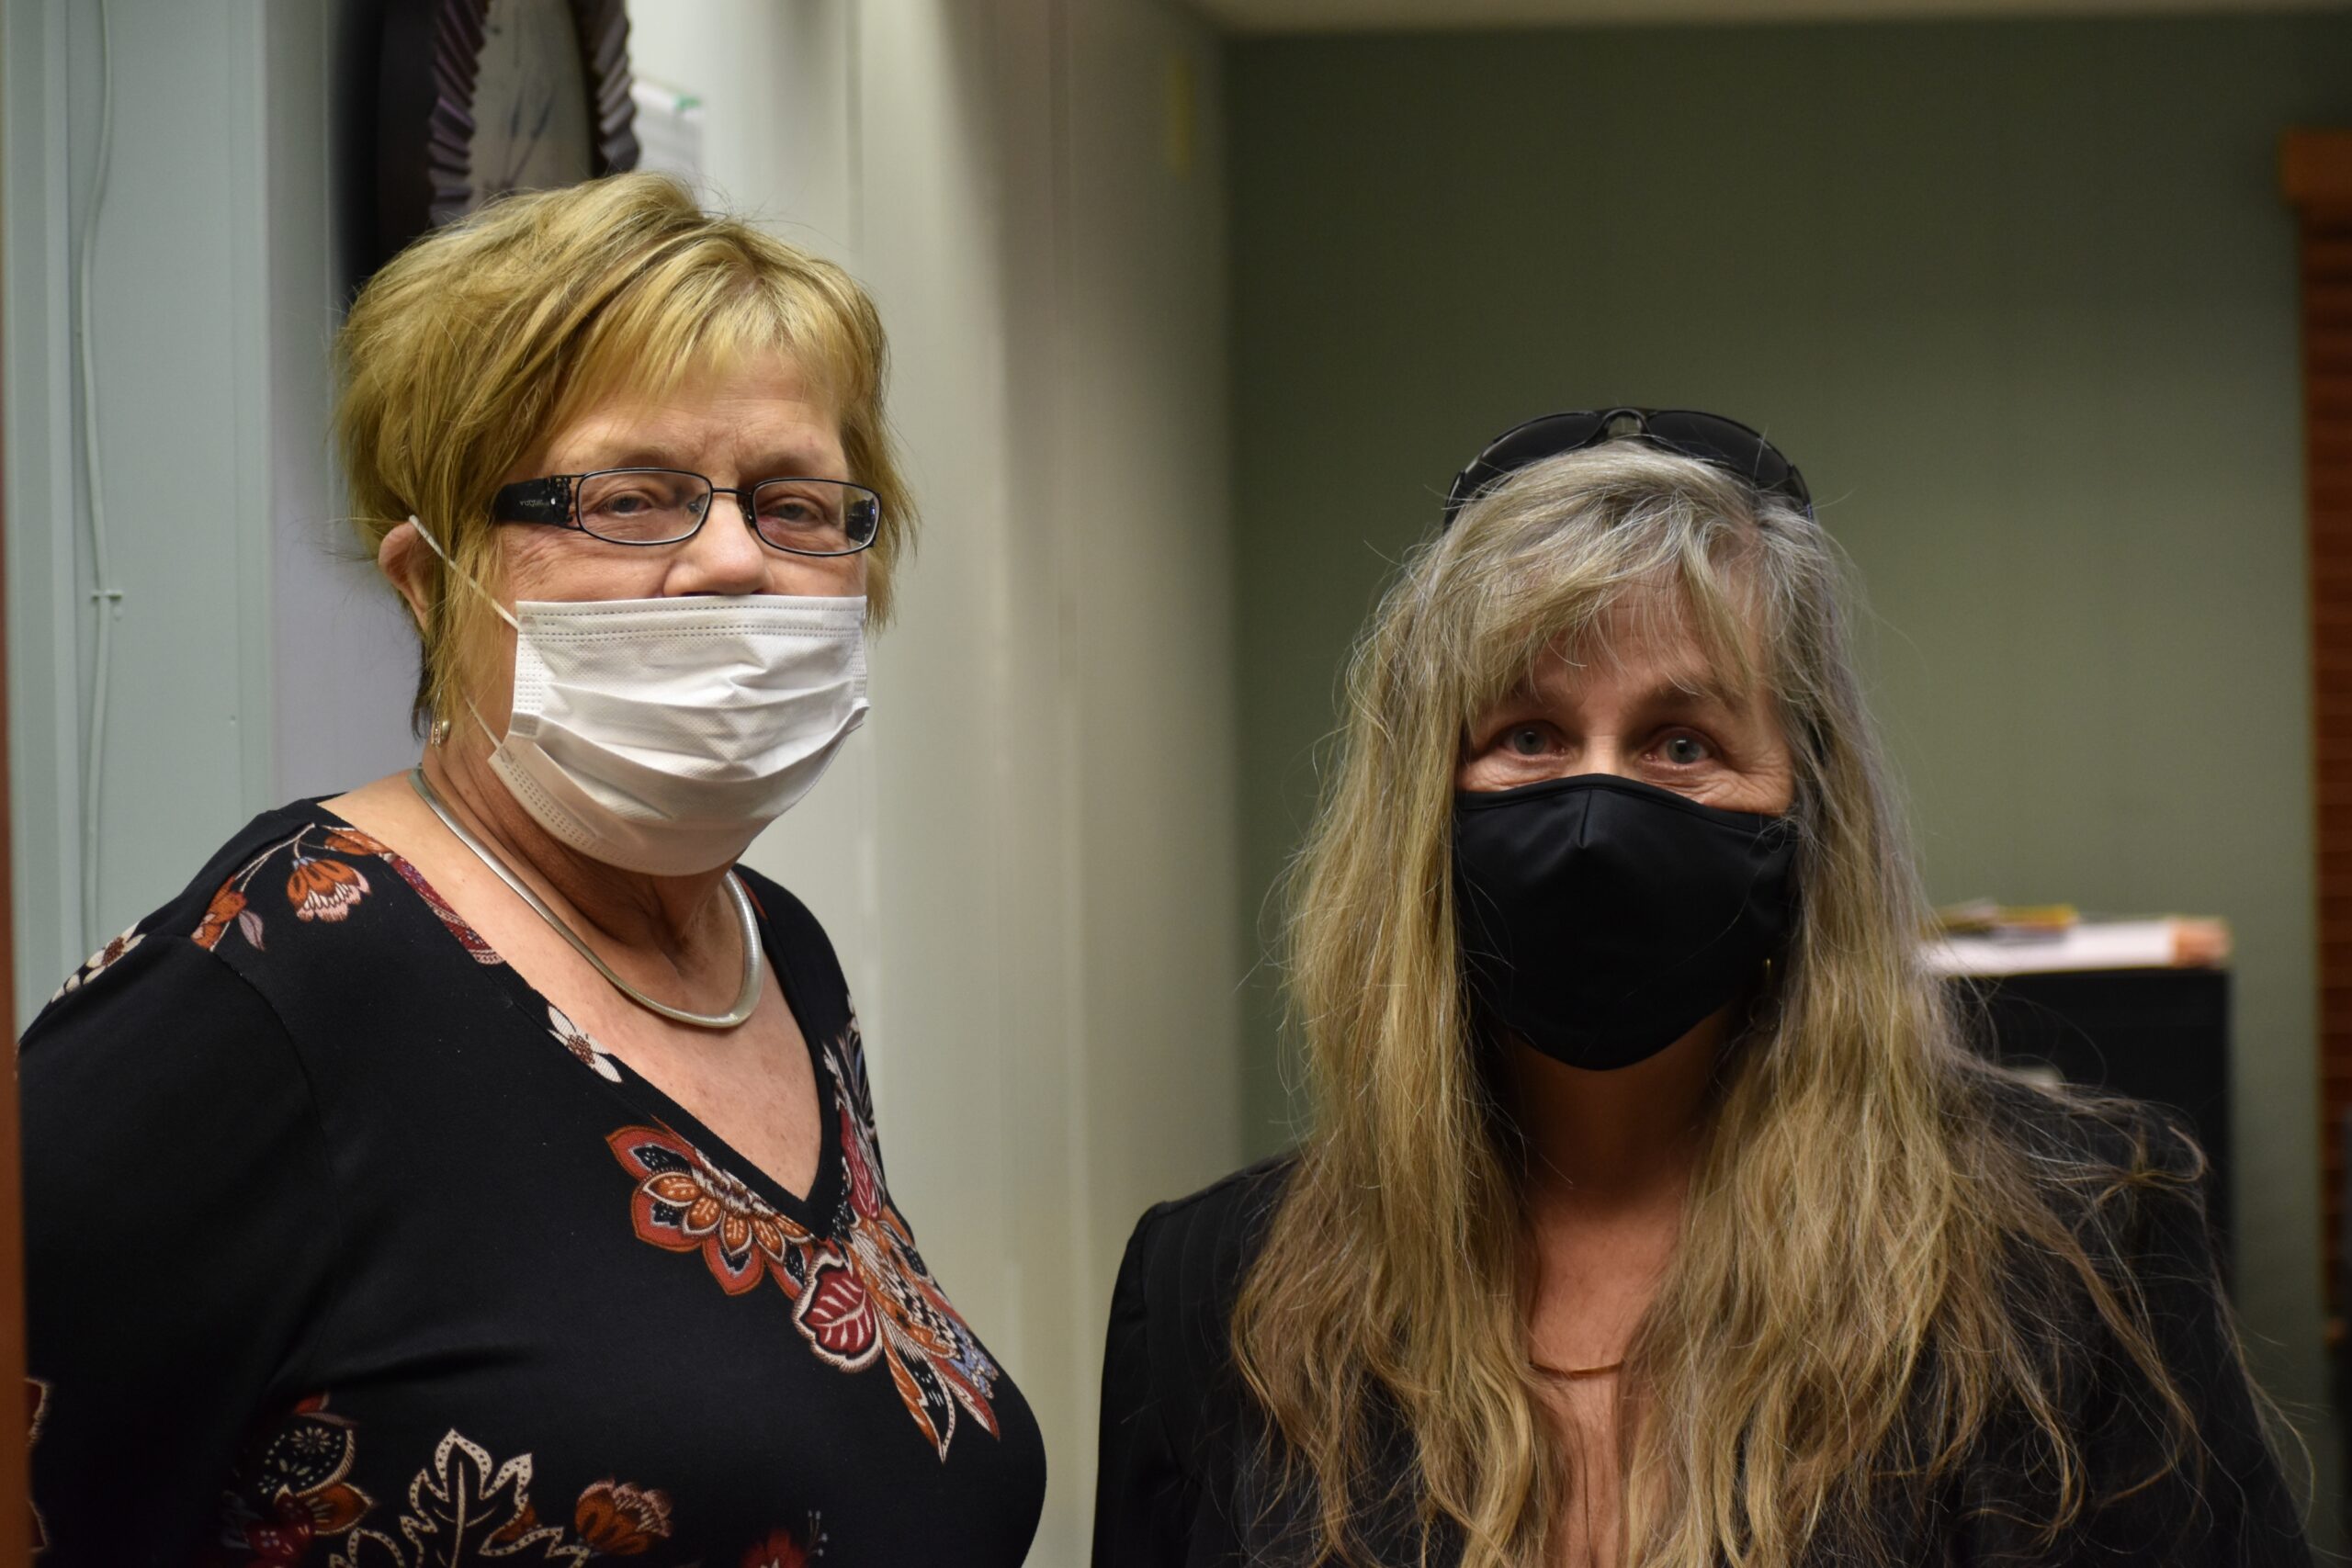 Two voters wearing face masks